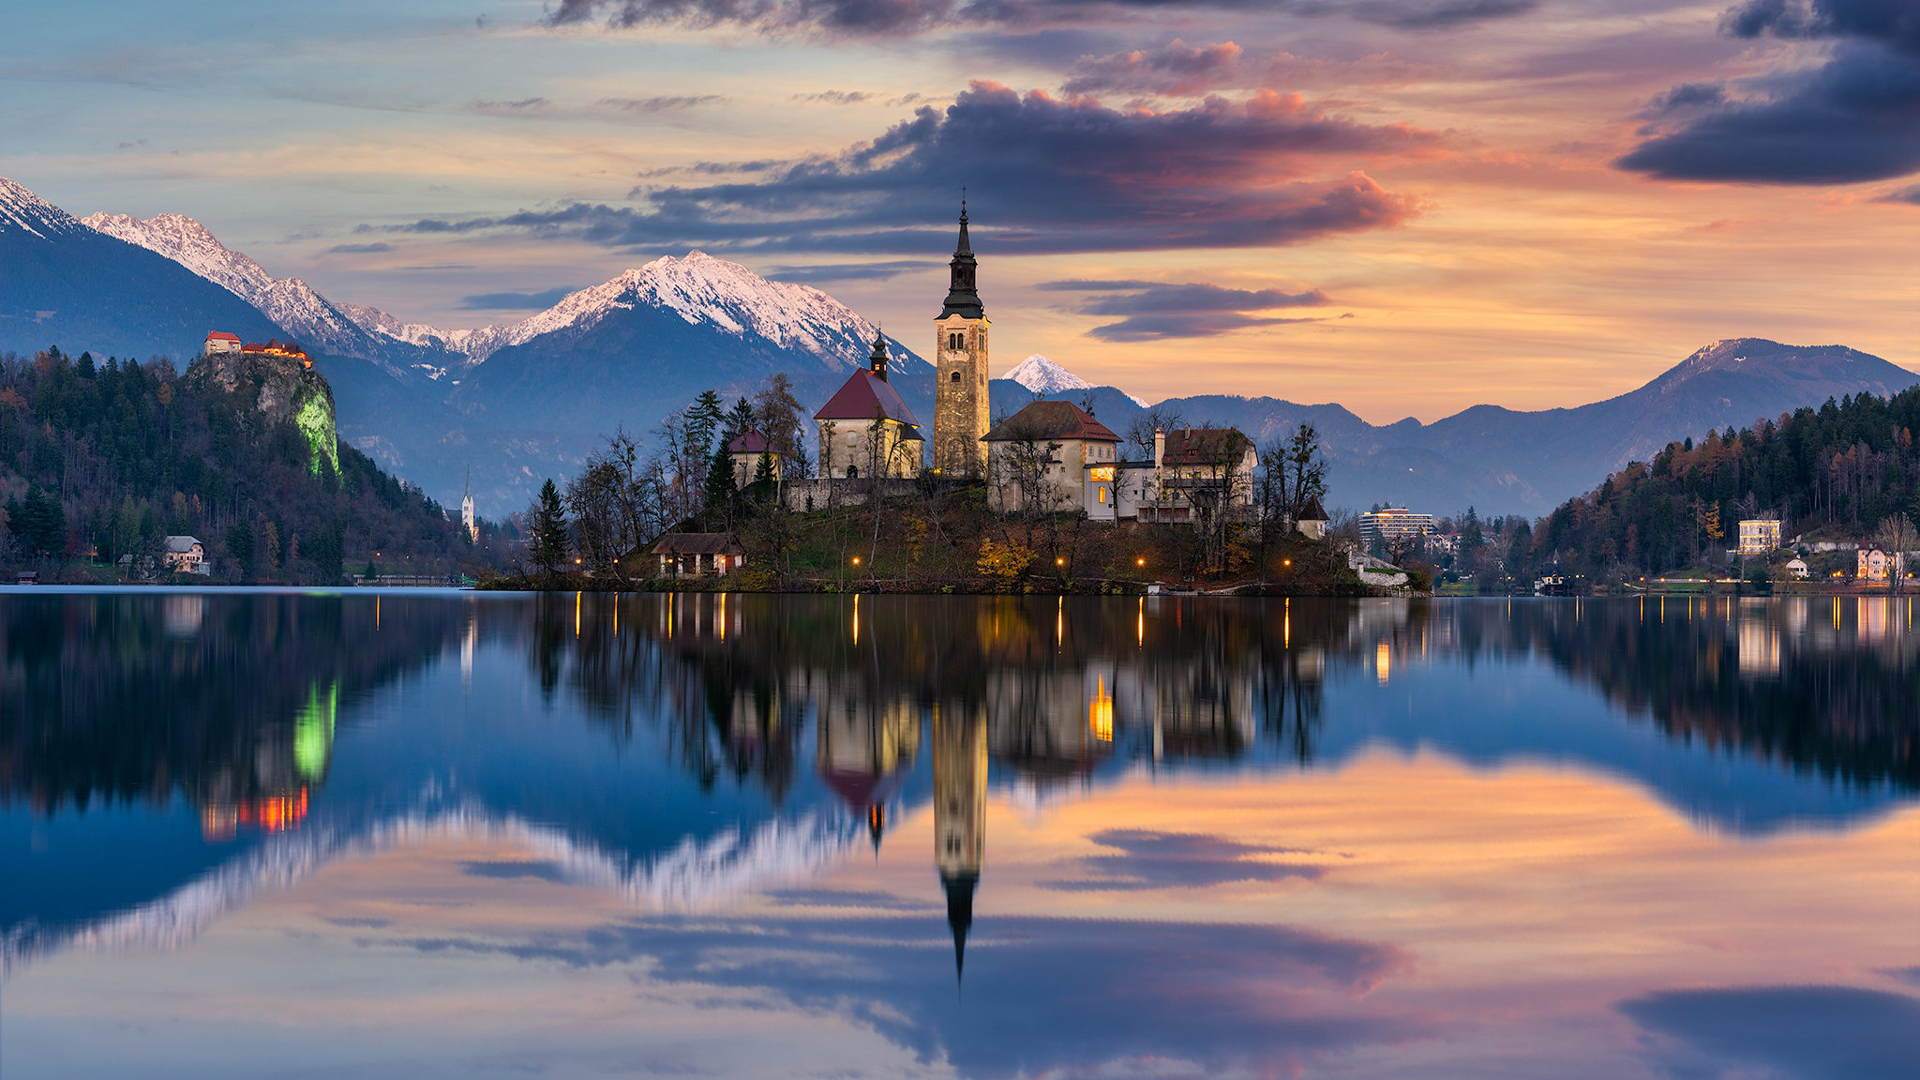 Church Lake Bled Slovenia Assumption of Mary Church Reflection On Water 2K Travel